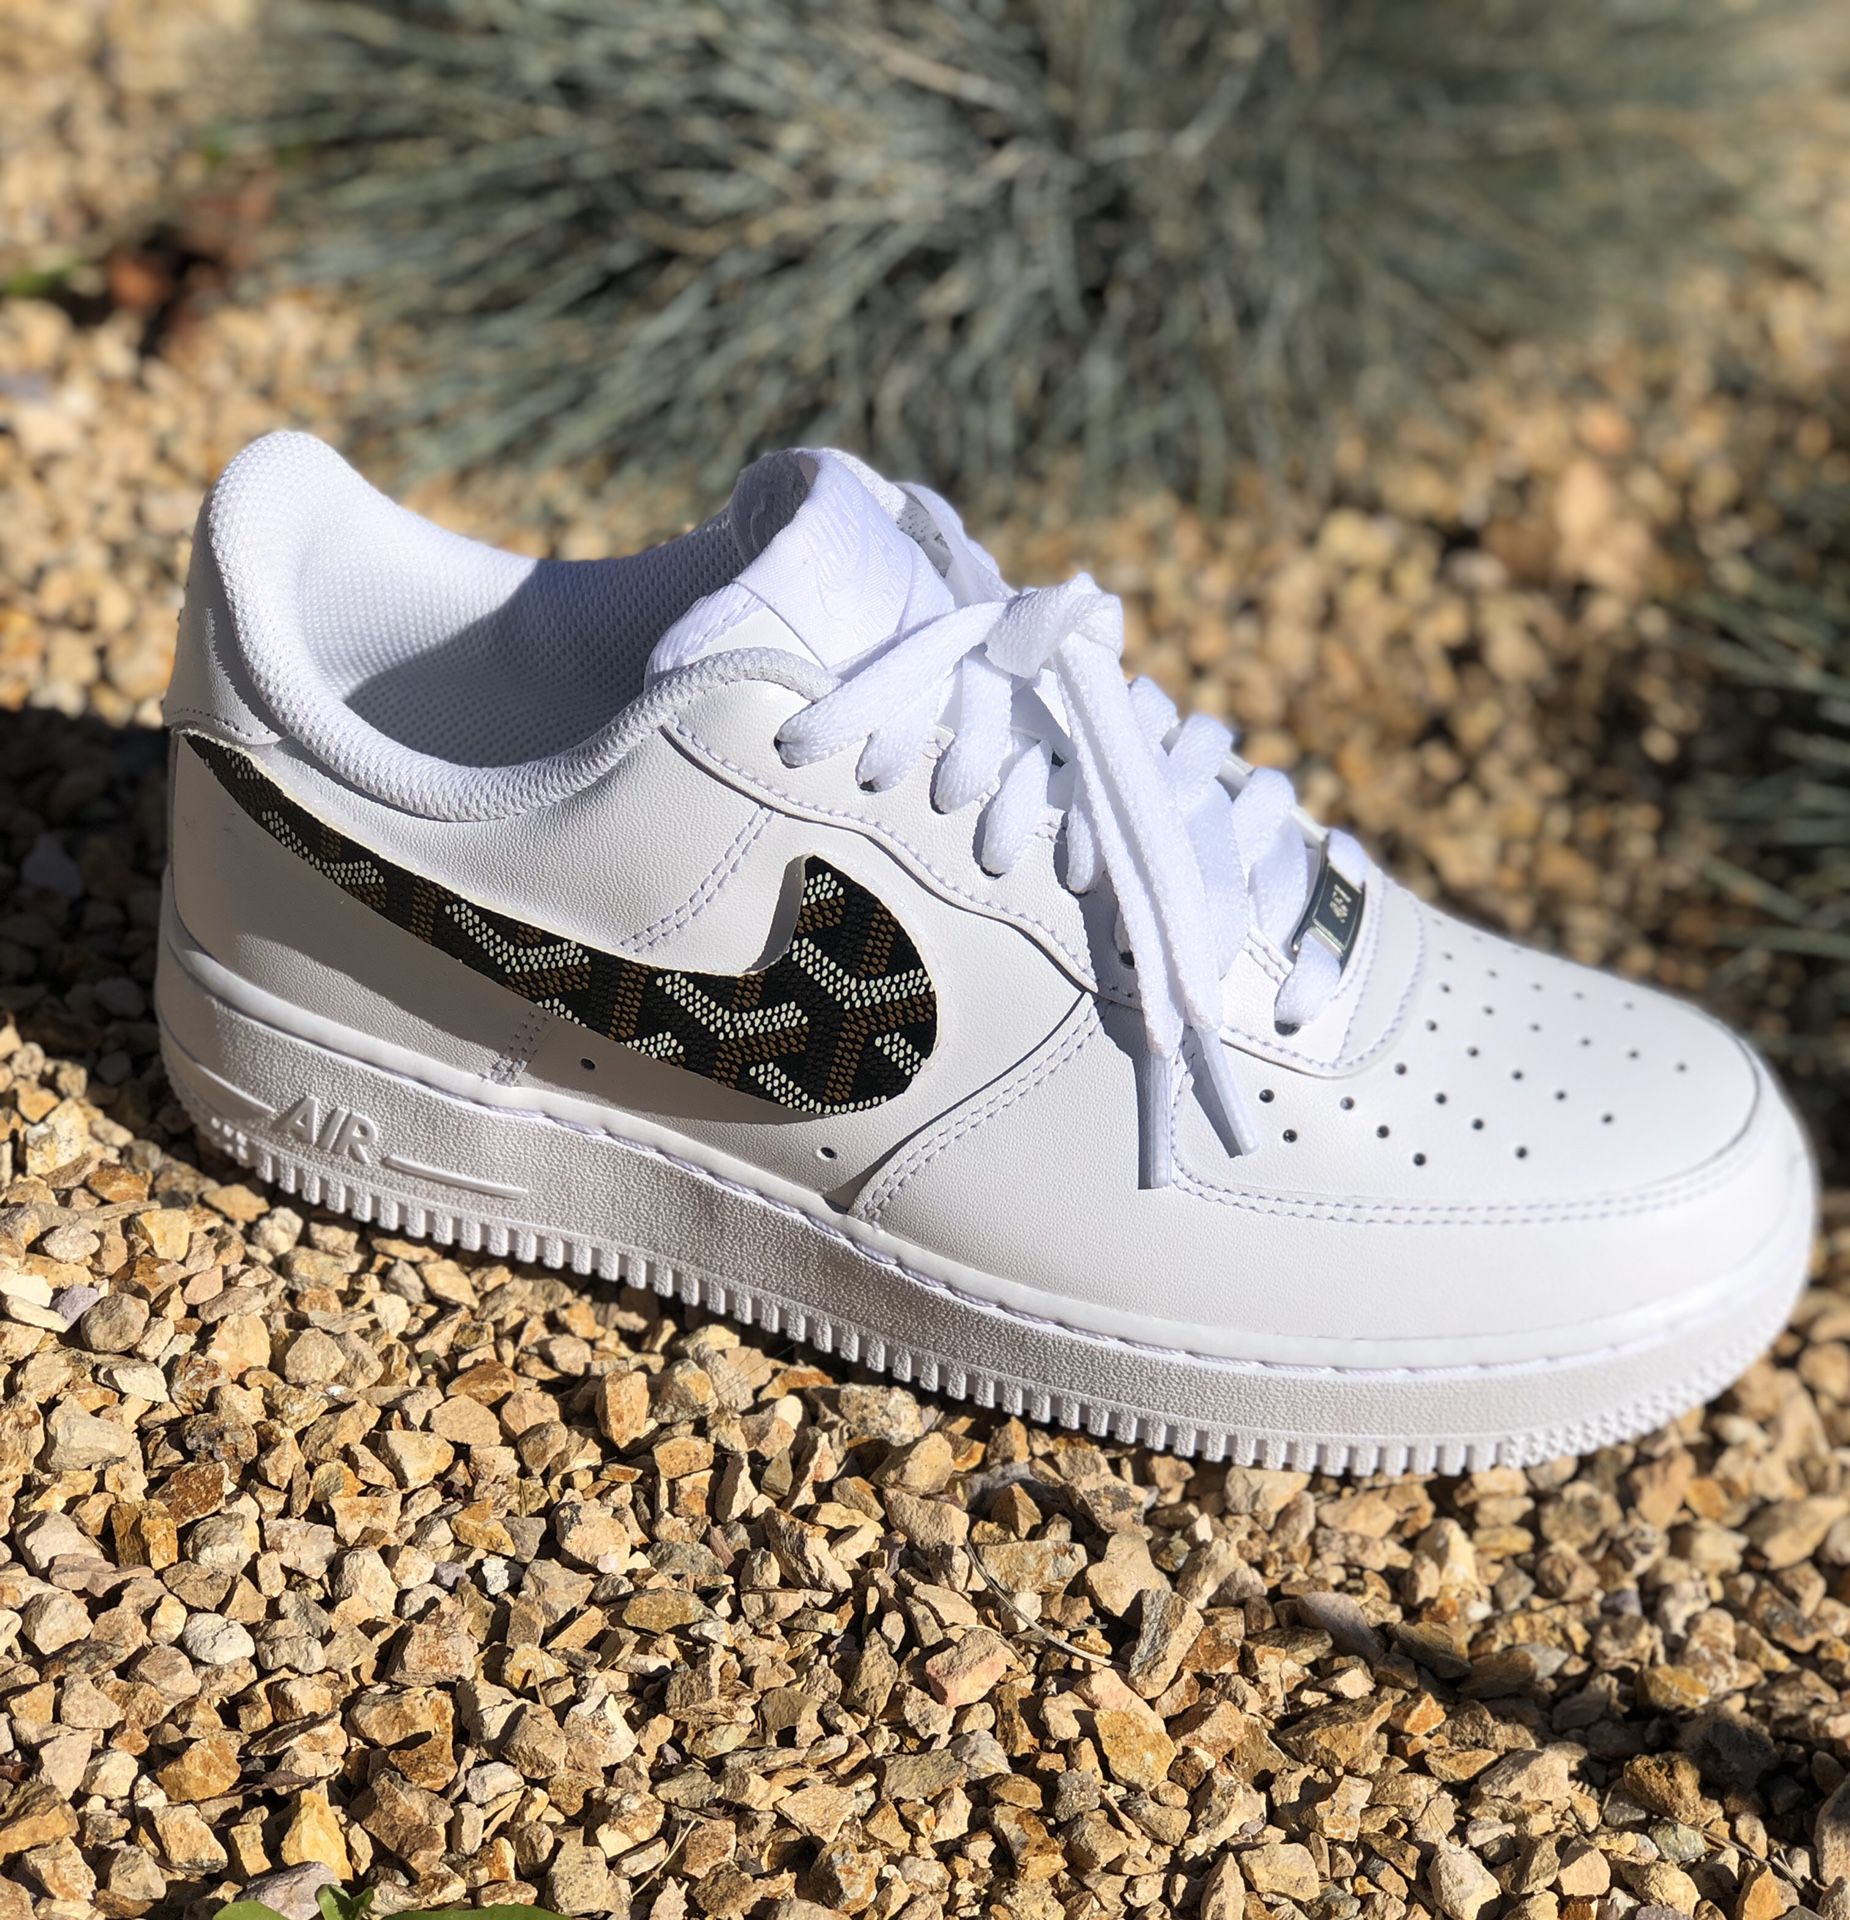 Louis Vuitton Custom Air Force 1 , MESSAGE ME FOR